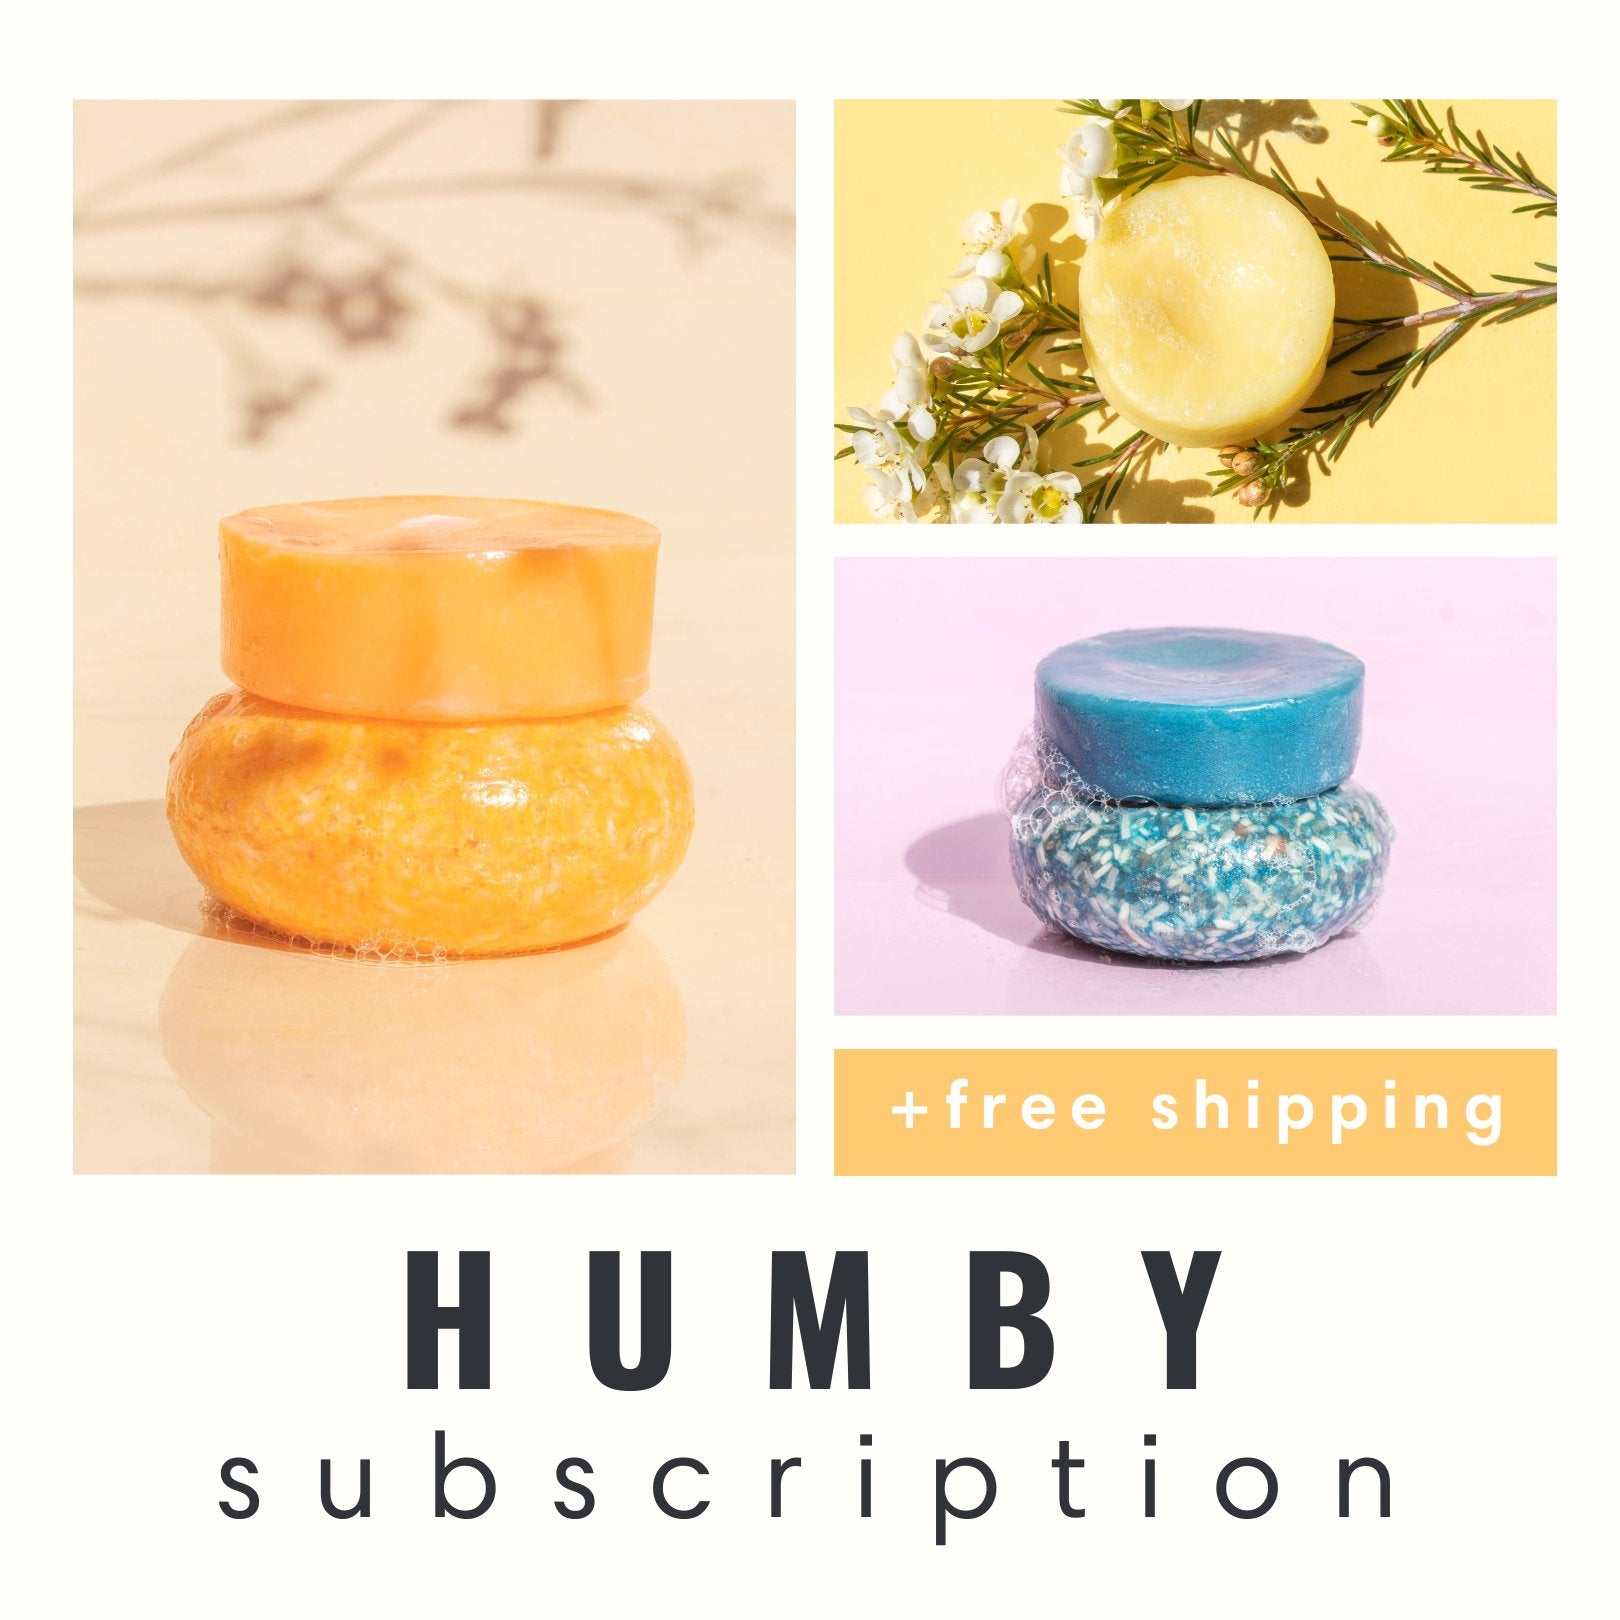 Humby Subscription - Free Shipping - Zero Waste Cartel